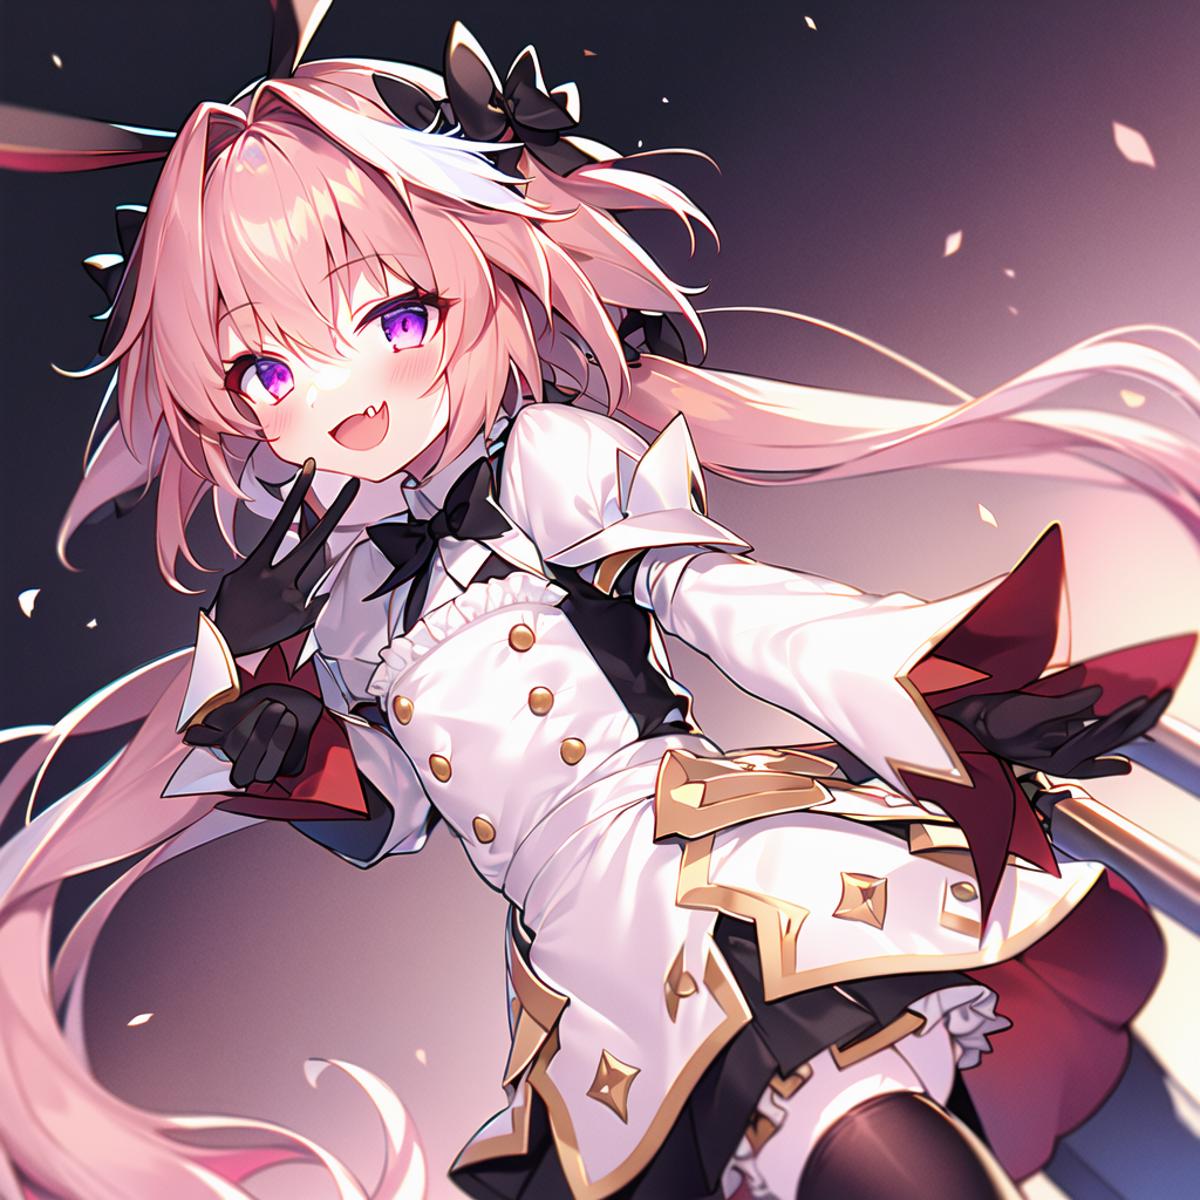 Astolfo Saber (Fate/Grand Order) - All 3 Ascensions image by ILoveMaids